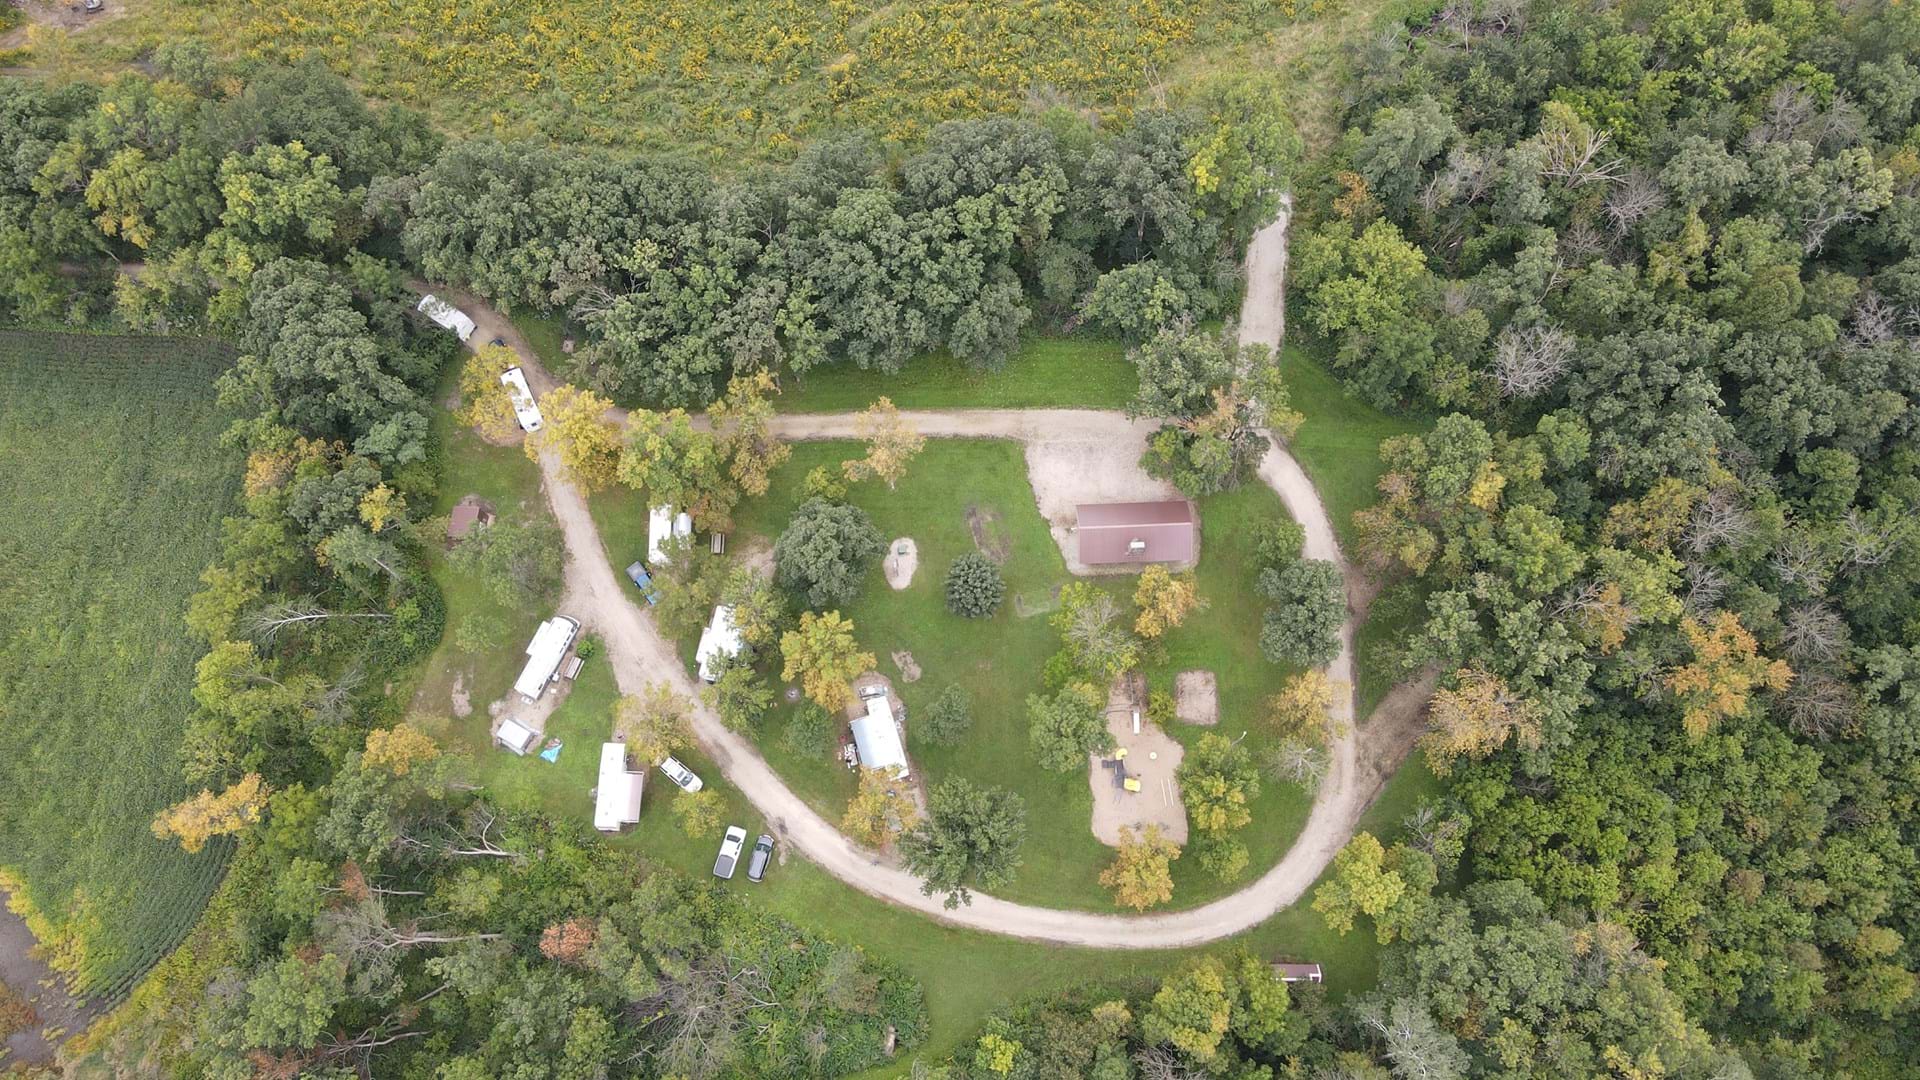 Overhead view of campground looking south